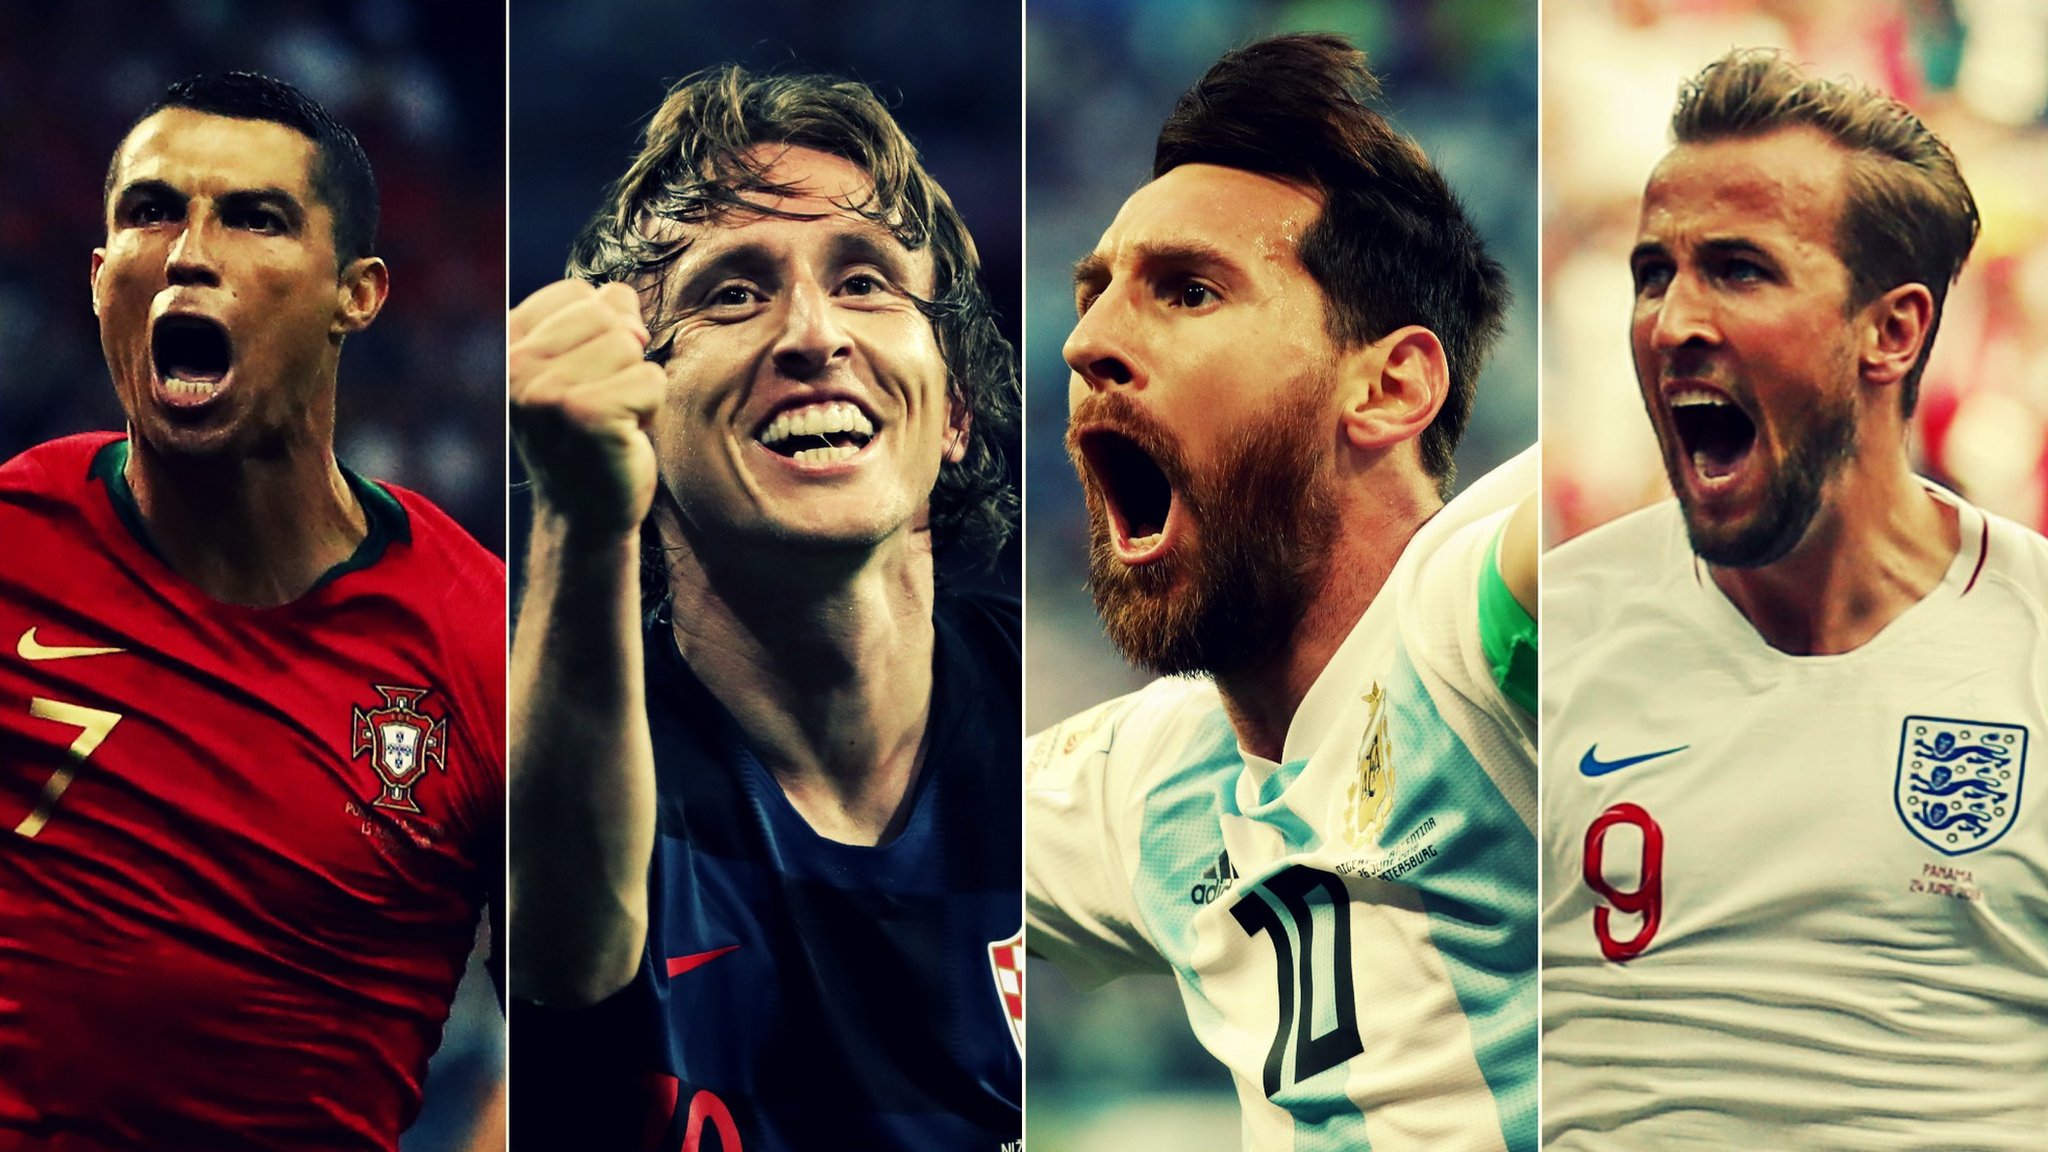 Kane? Messi? Modric? Pick your team of the group stage